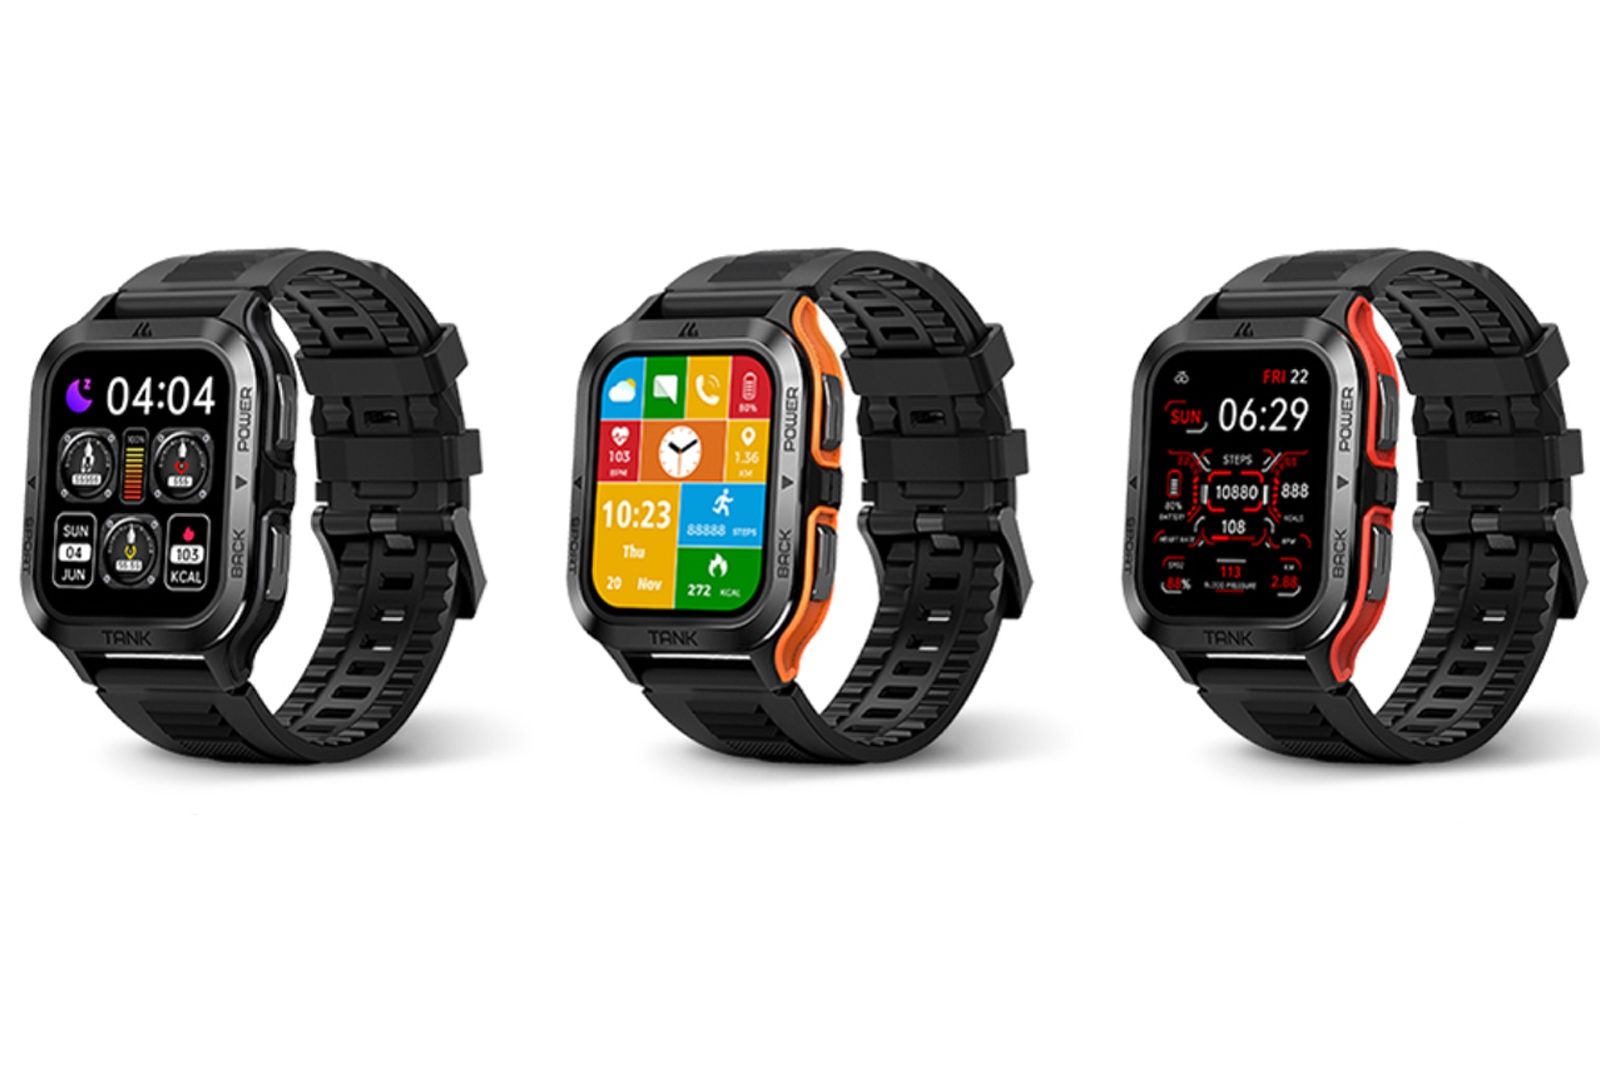 Kospet releases powerful smartwatches – Tank T2 and M2